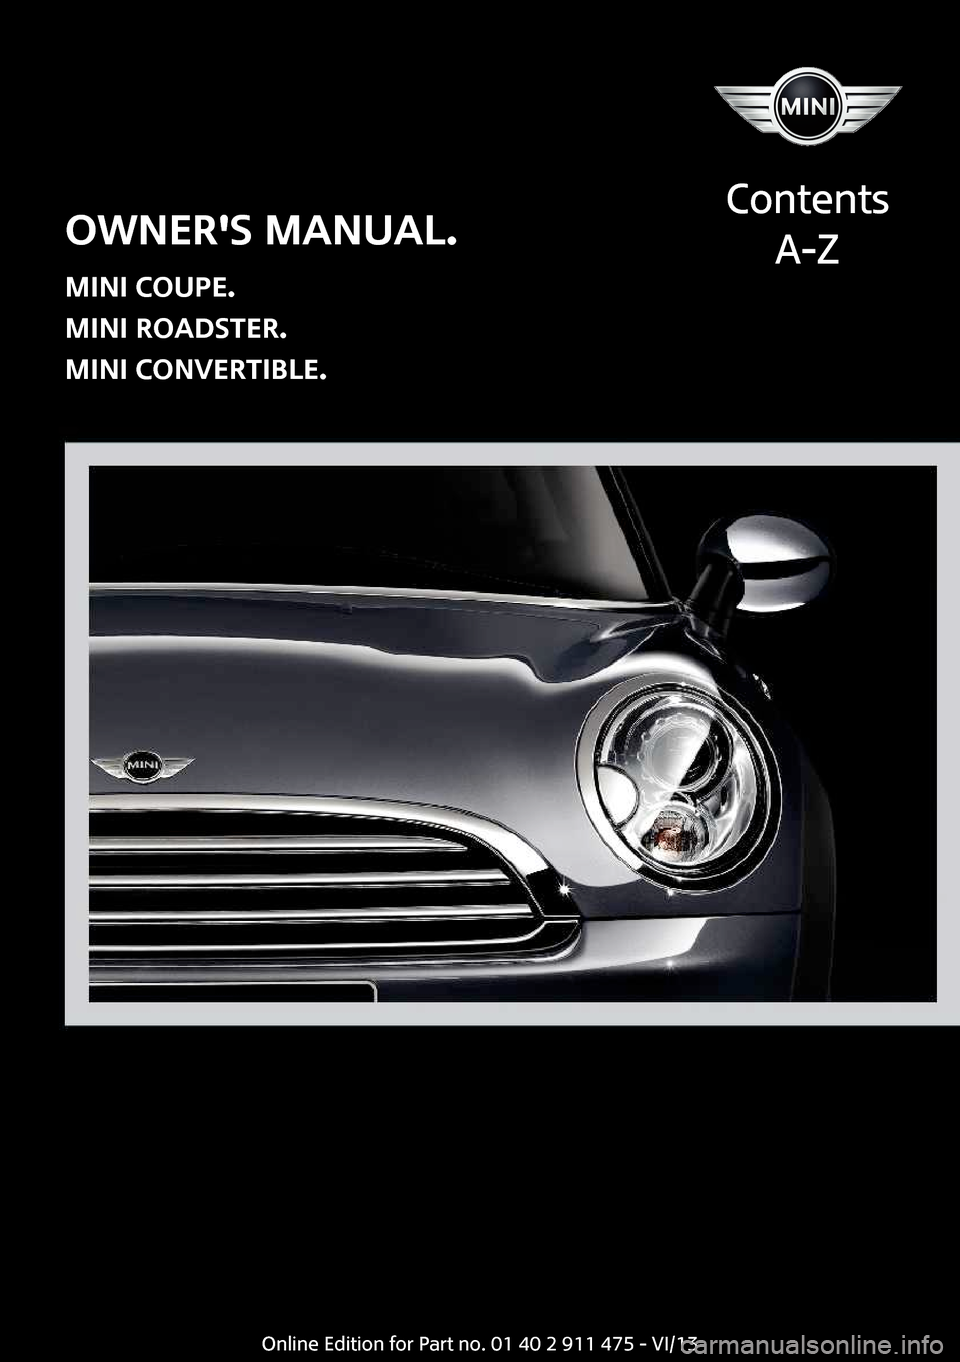 MINI Roadster 2014  Owners Manual Owners Manual.
MINI Coupe.
MINI Roadster.
MINI Convertible.
Contents
A-ZOnline Edition for Part no. 01 40 2 911 475 - VI/13  